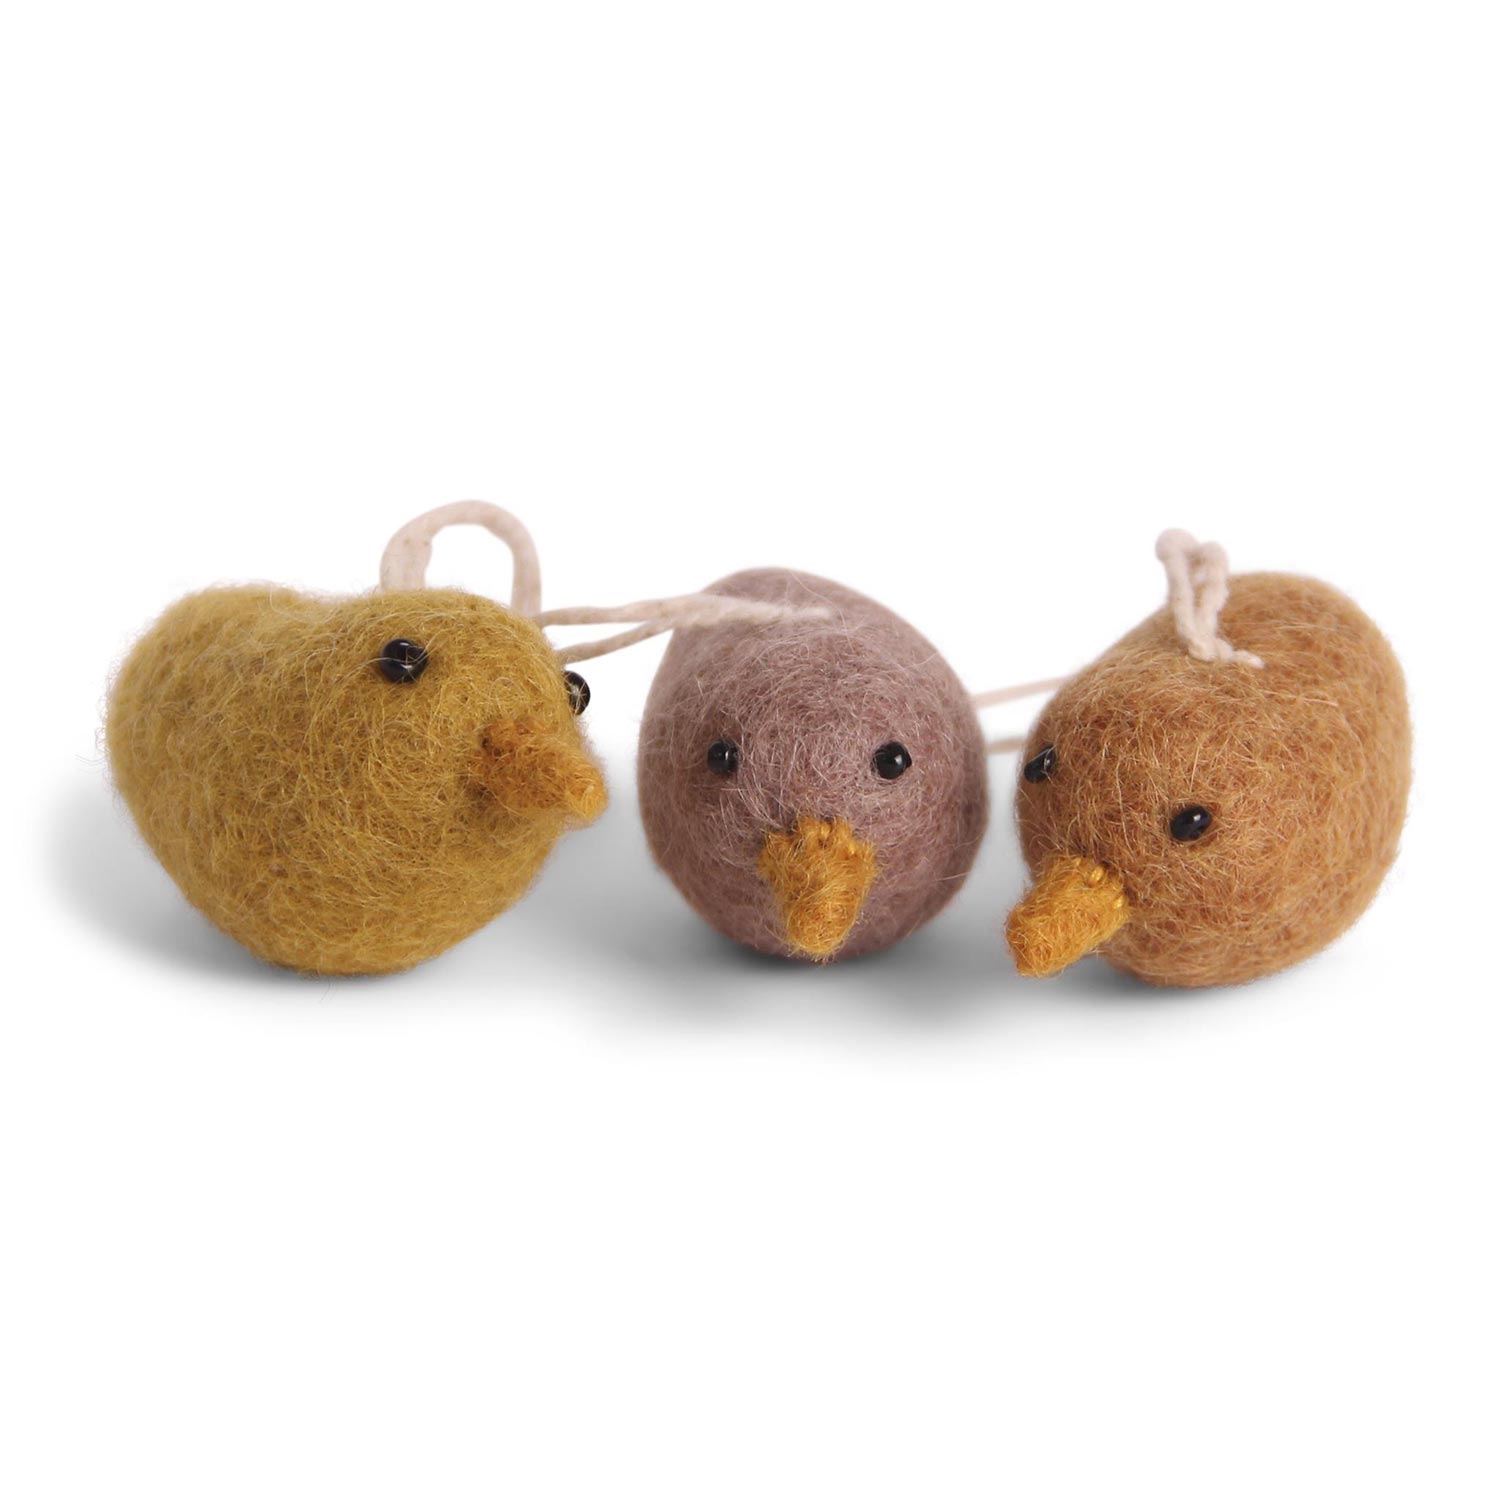 En Gri & Sif 3  little felt birds in different shades of yellow with string attached to hang them